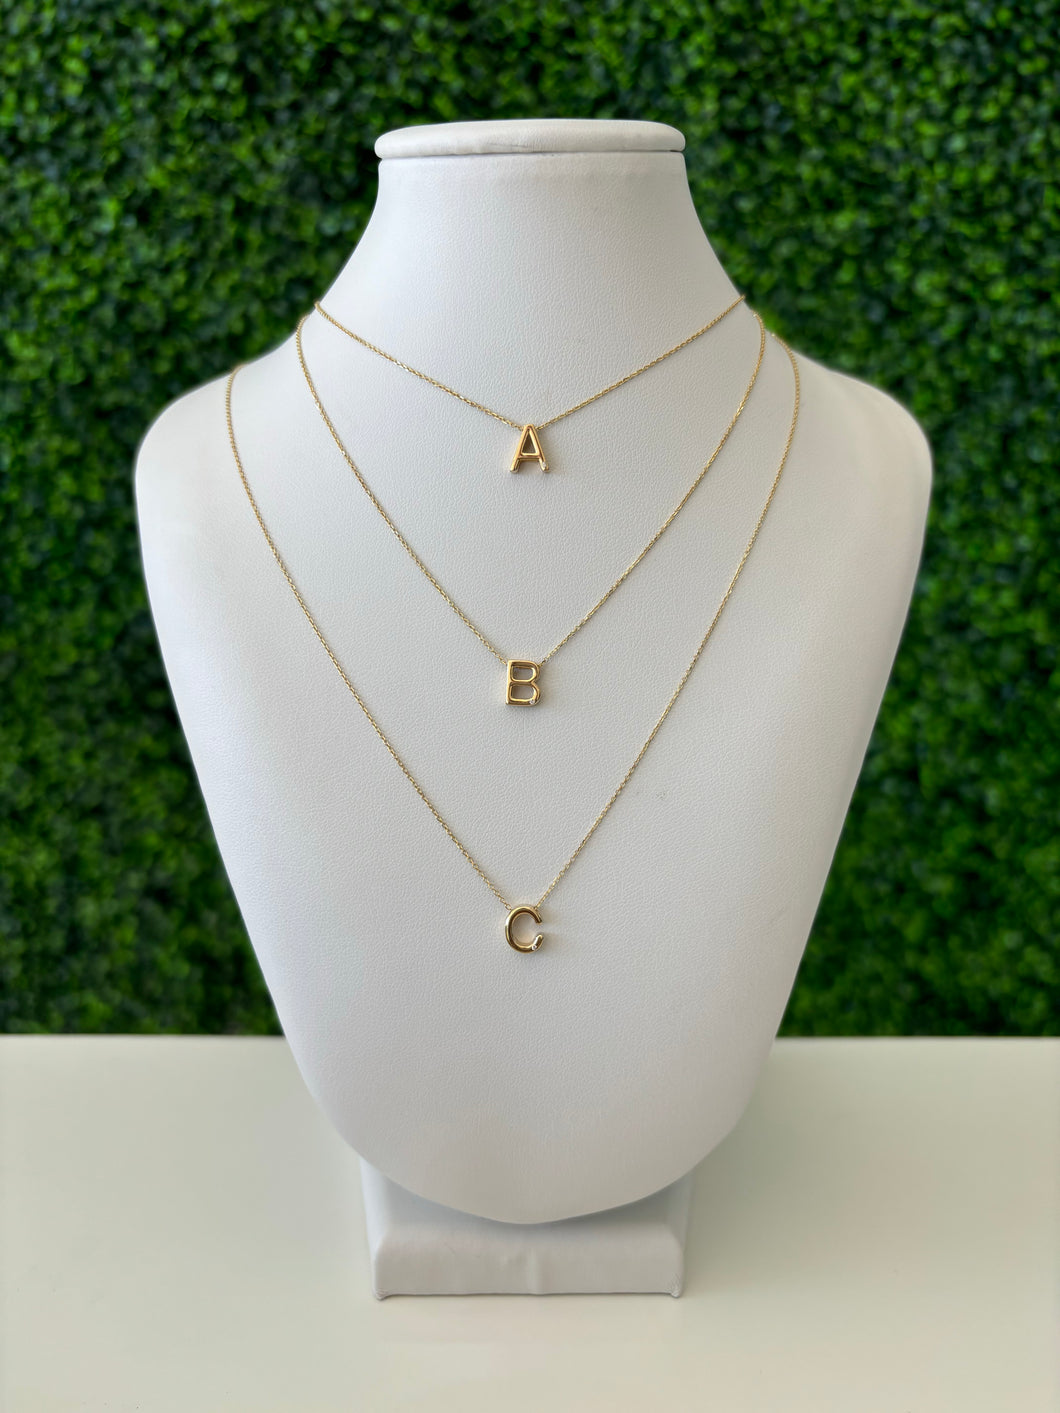 14kt Gold Initial Block Necklace- ALL LETTERS AVALIABLE!